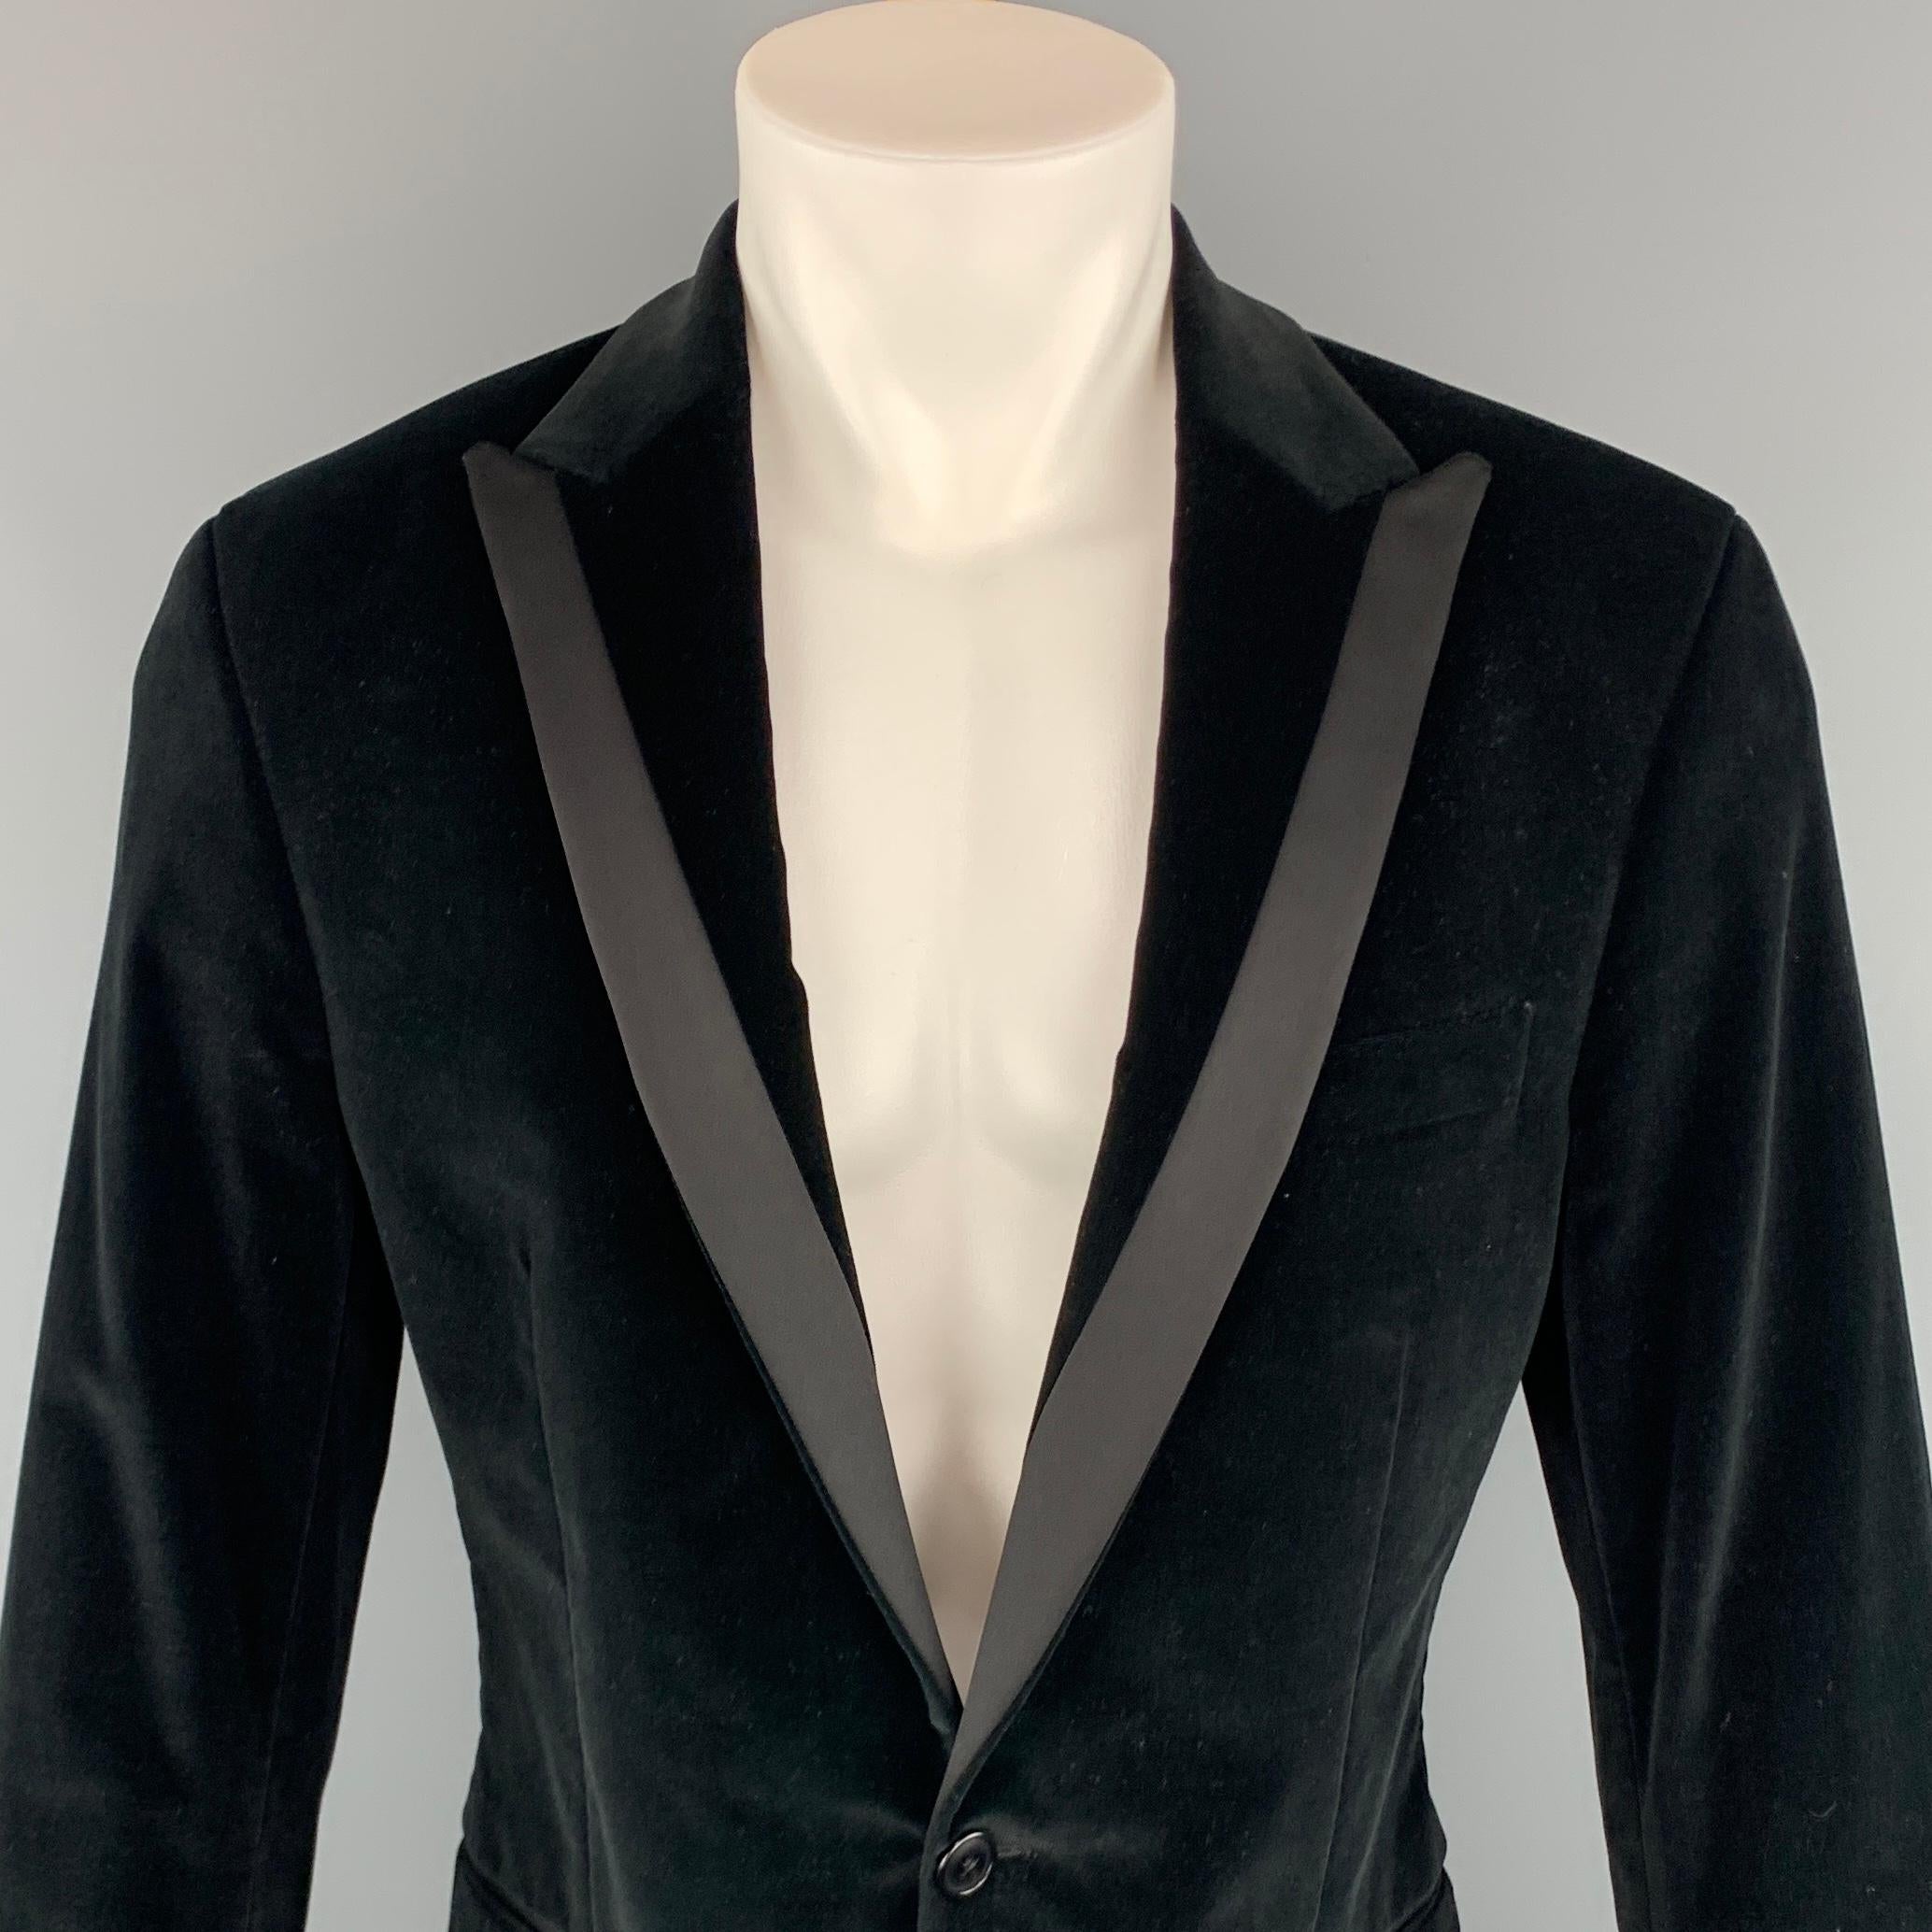 THEORY sport coat comes in black velvet with a peak lapel and a single button closure. 

Excellent Pre-Owned Condition. 
Marked: 40 R

Measurements:

Shoulder: 18 in. 
Chest: 35 in. 
Sleeve: 25.5 in. 
Length: 29.5 in. 